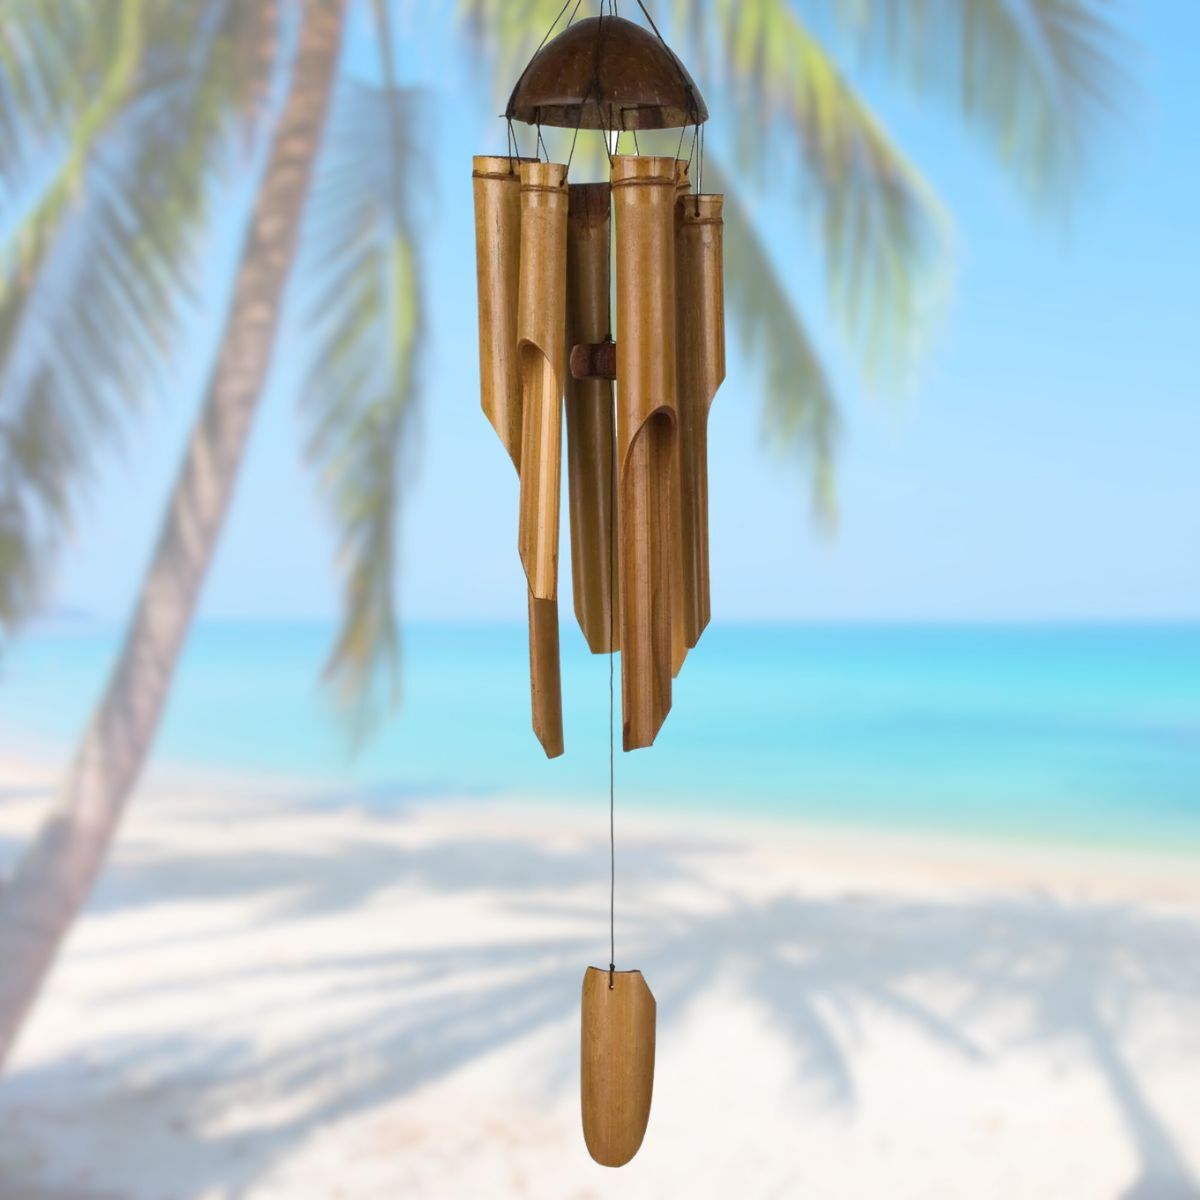 Woodstock Percussion 28 Inch Half Coconut Bamboo Wind Chime